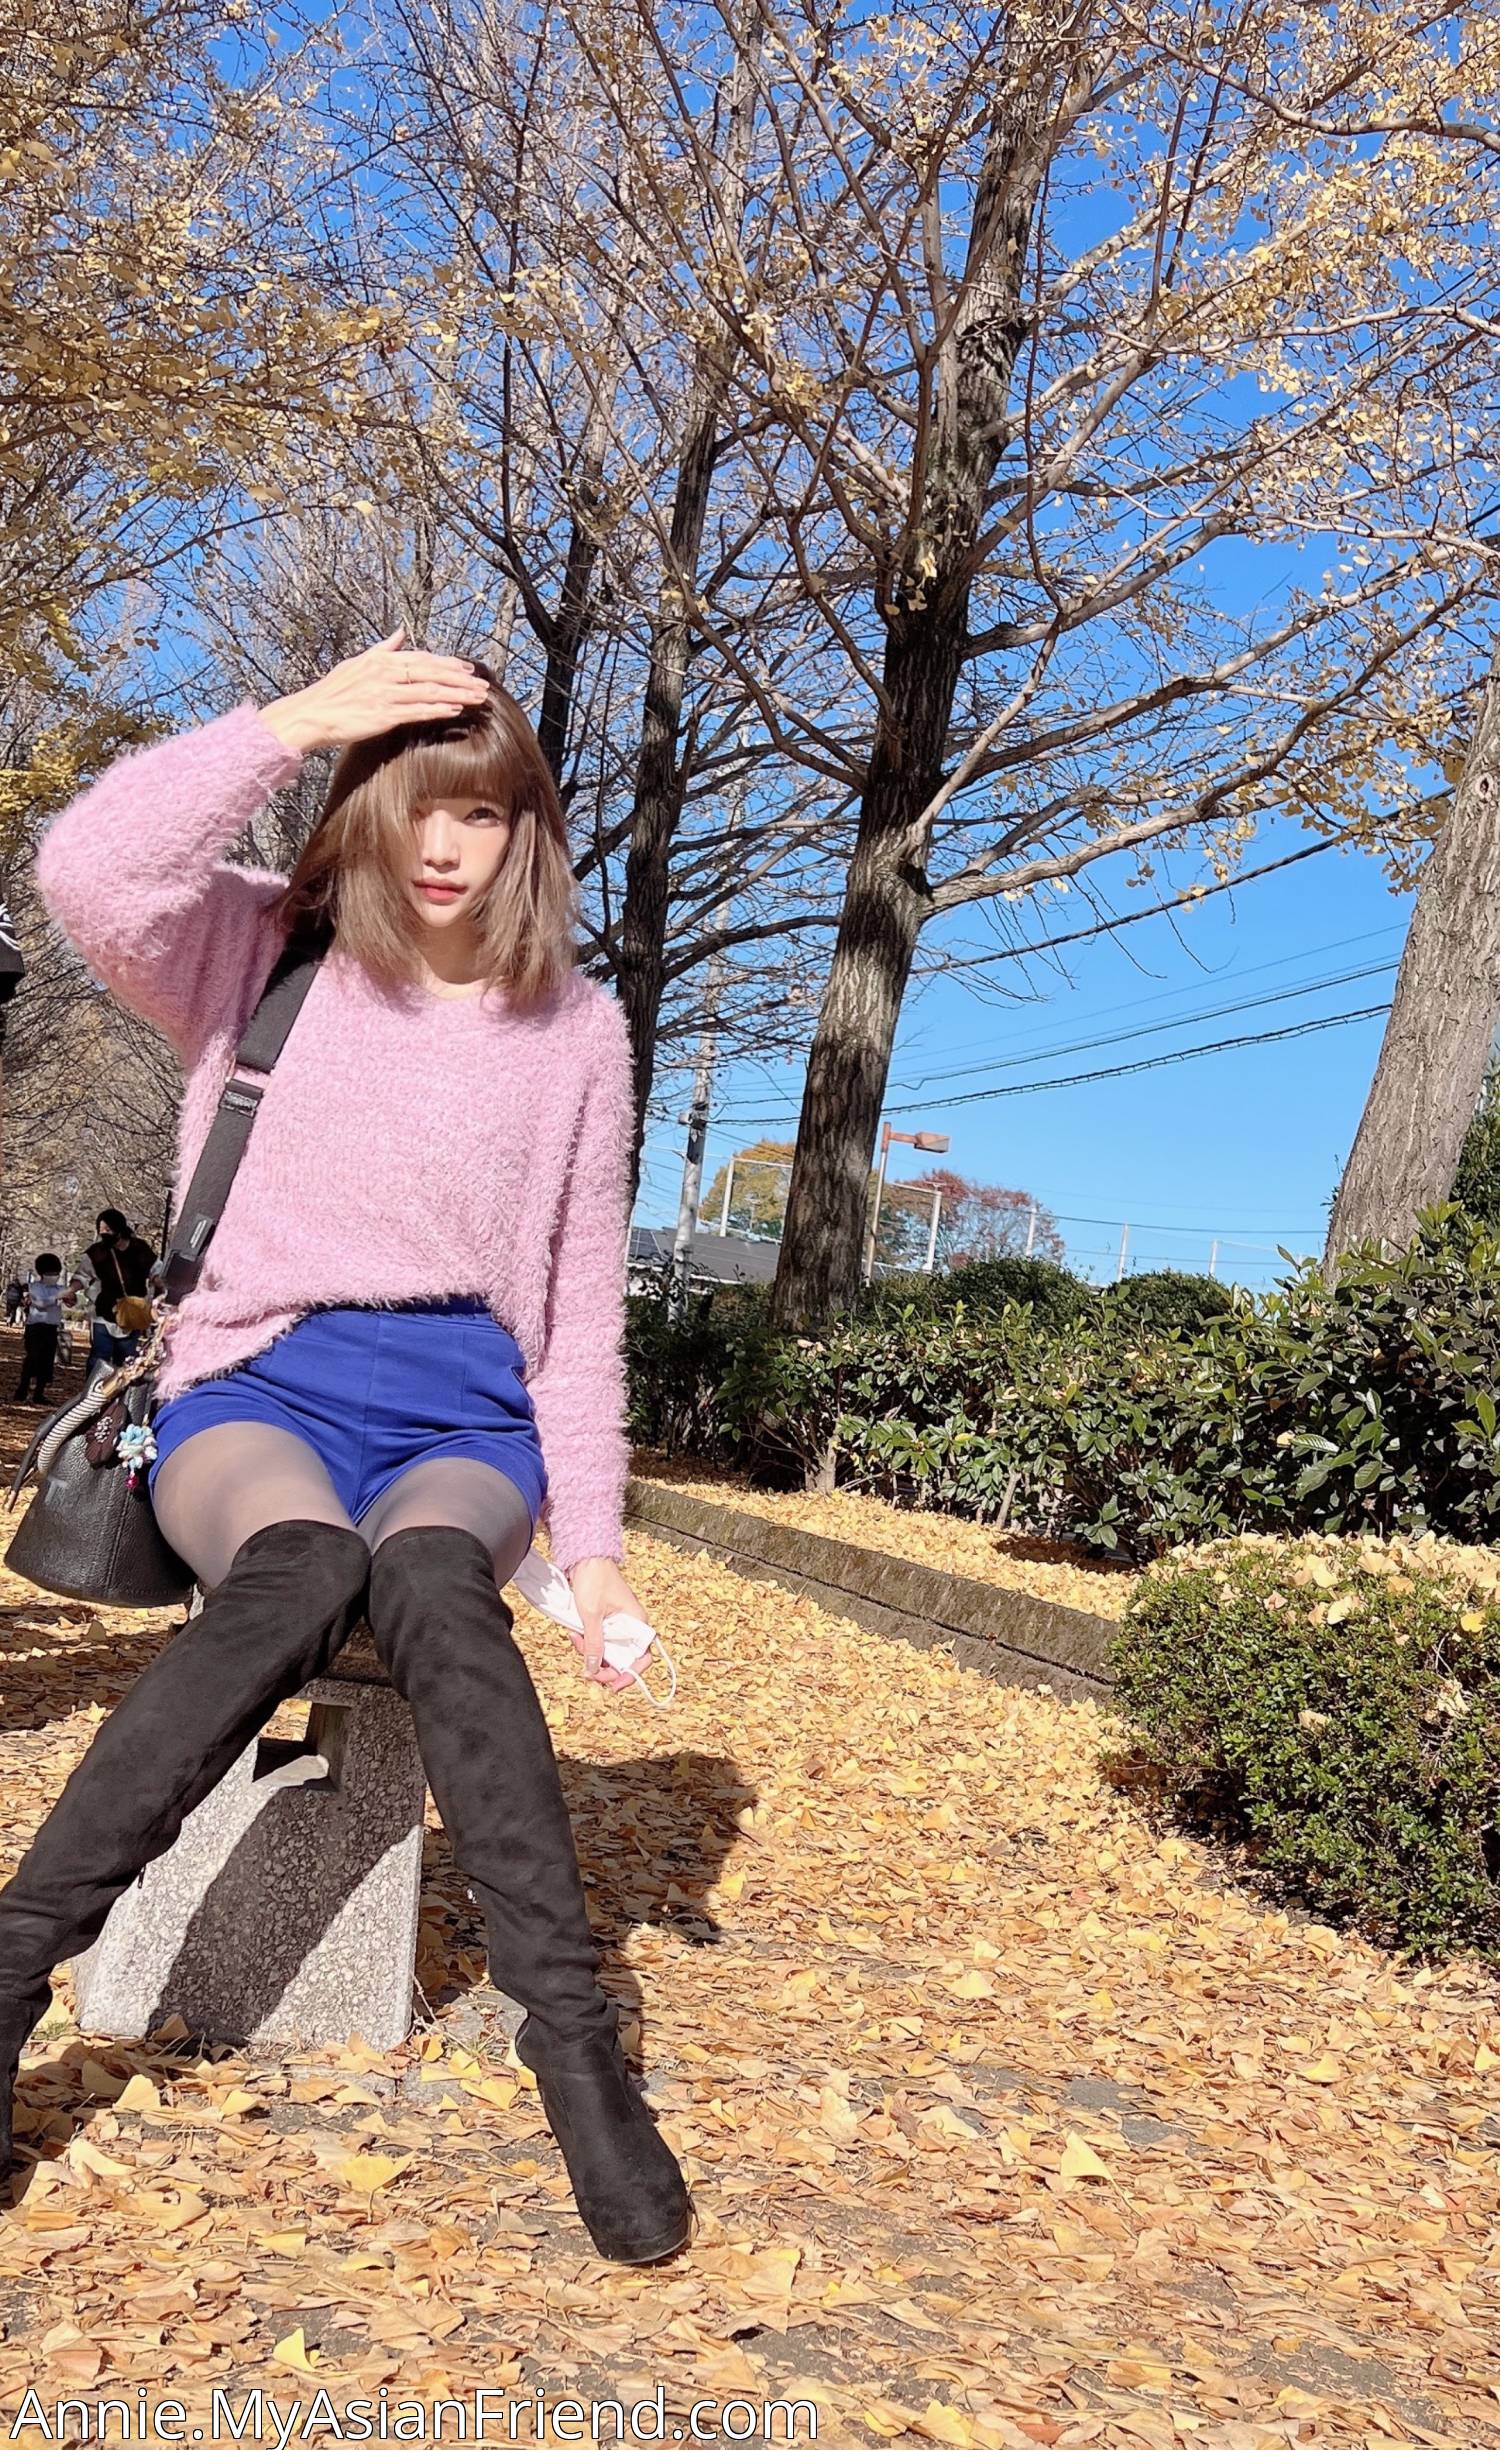 Annie's personal blog photo 1 added Sunday the 27th of November 2022